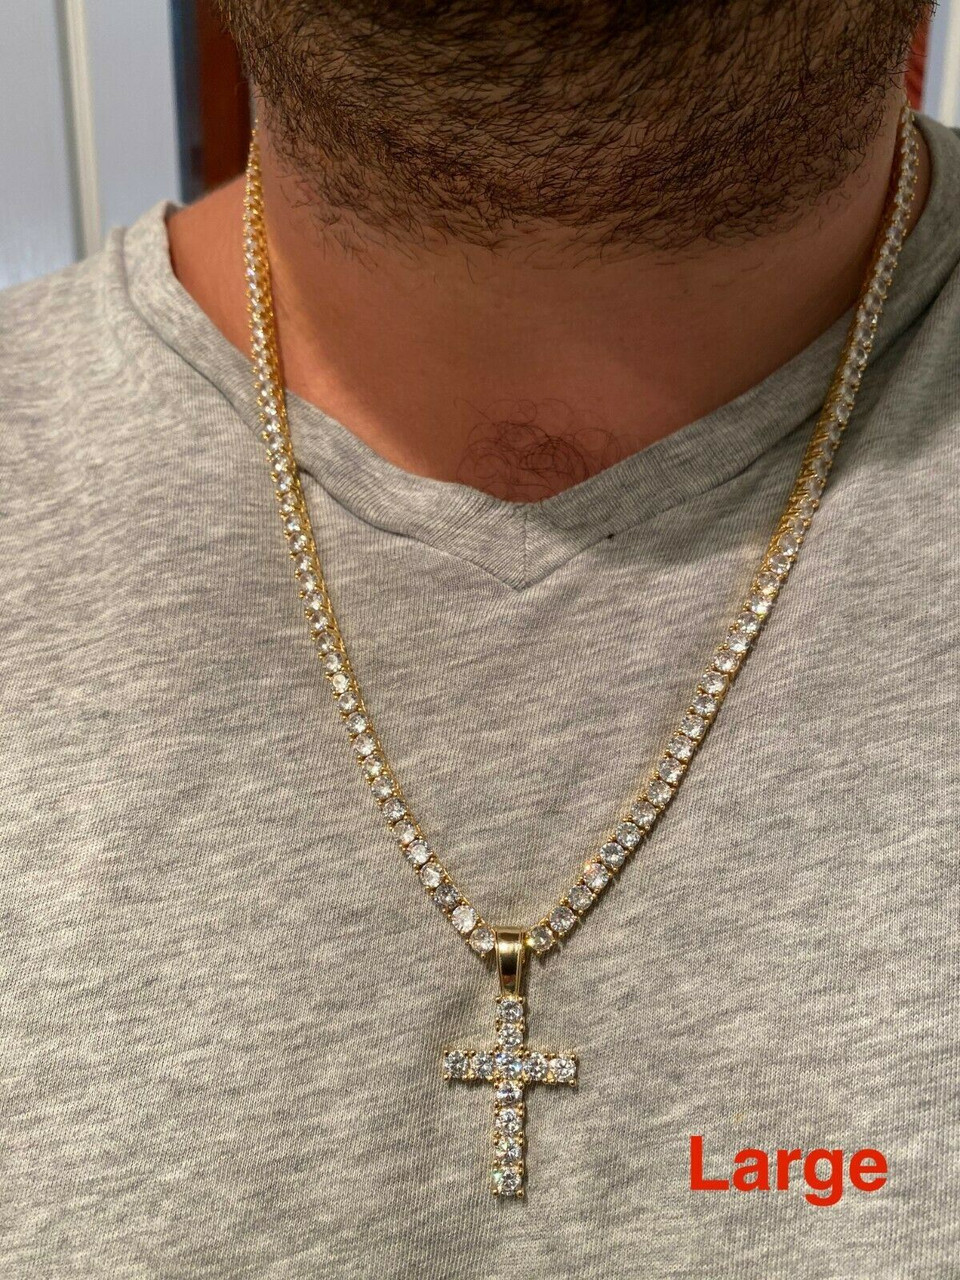 Vermeil / 14K Gold Filled Cross Necklace (Rope Chain)